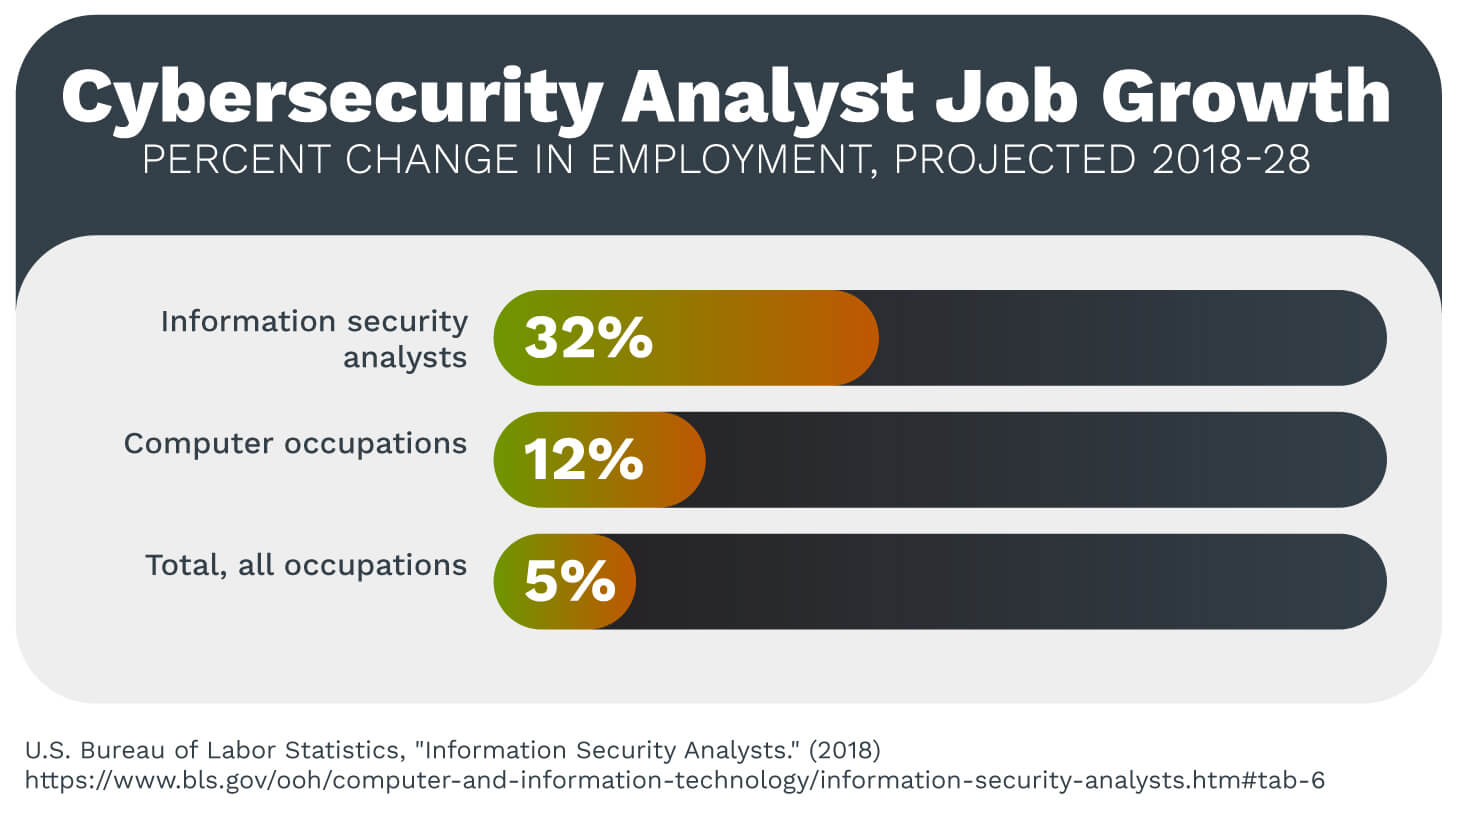 A chart showing projected cybersecurity analyst job growth